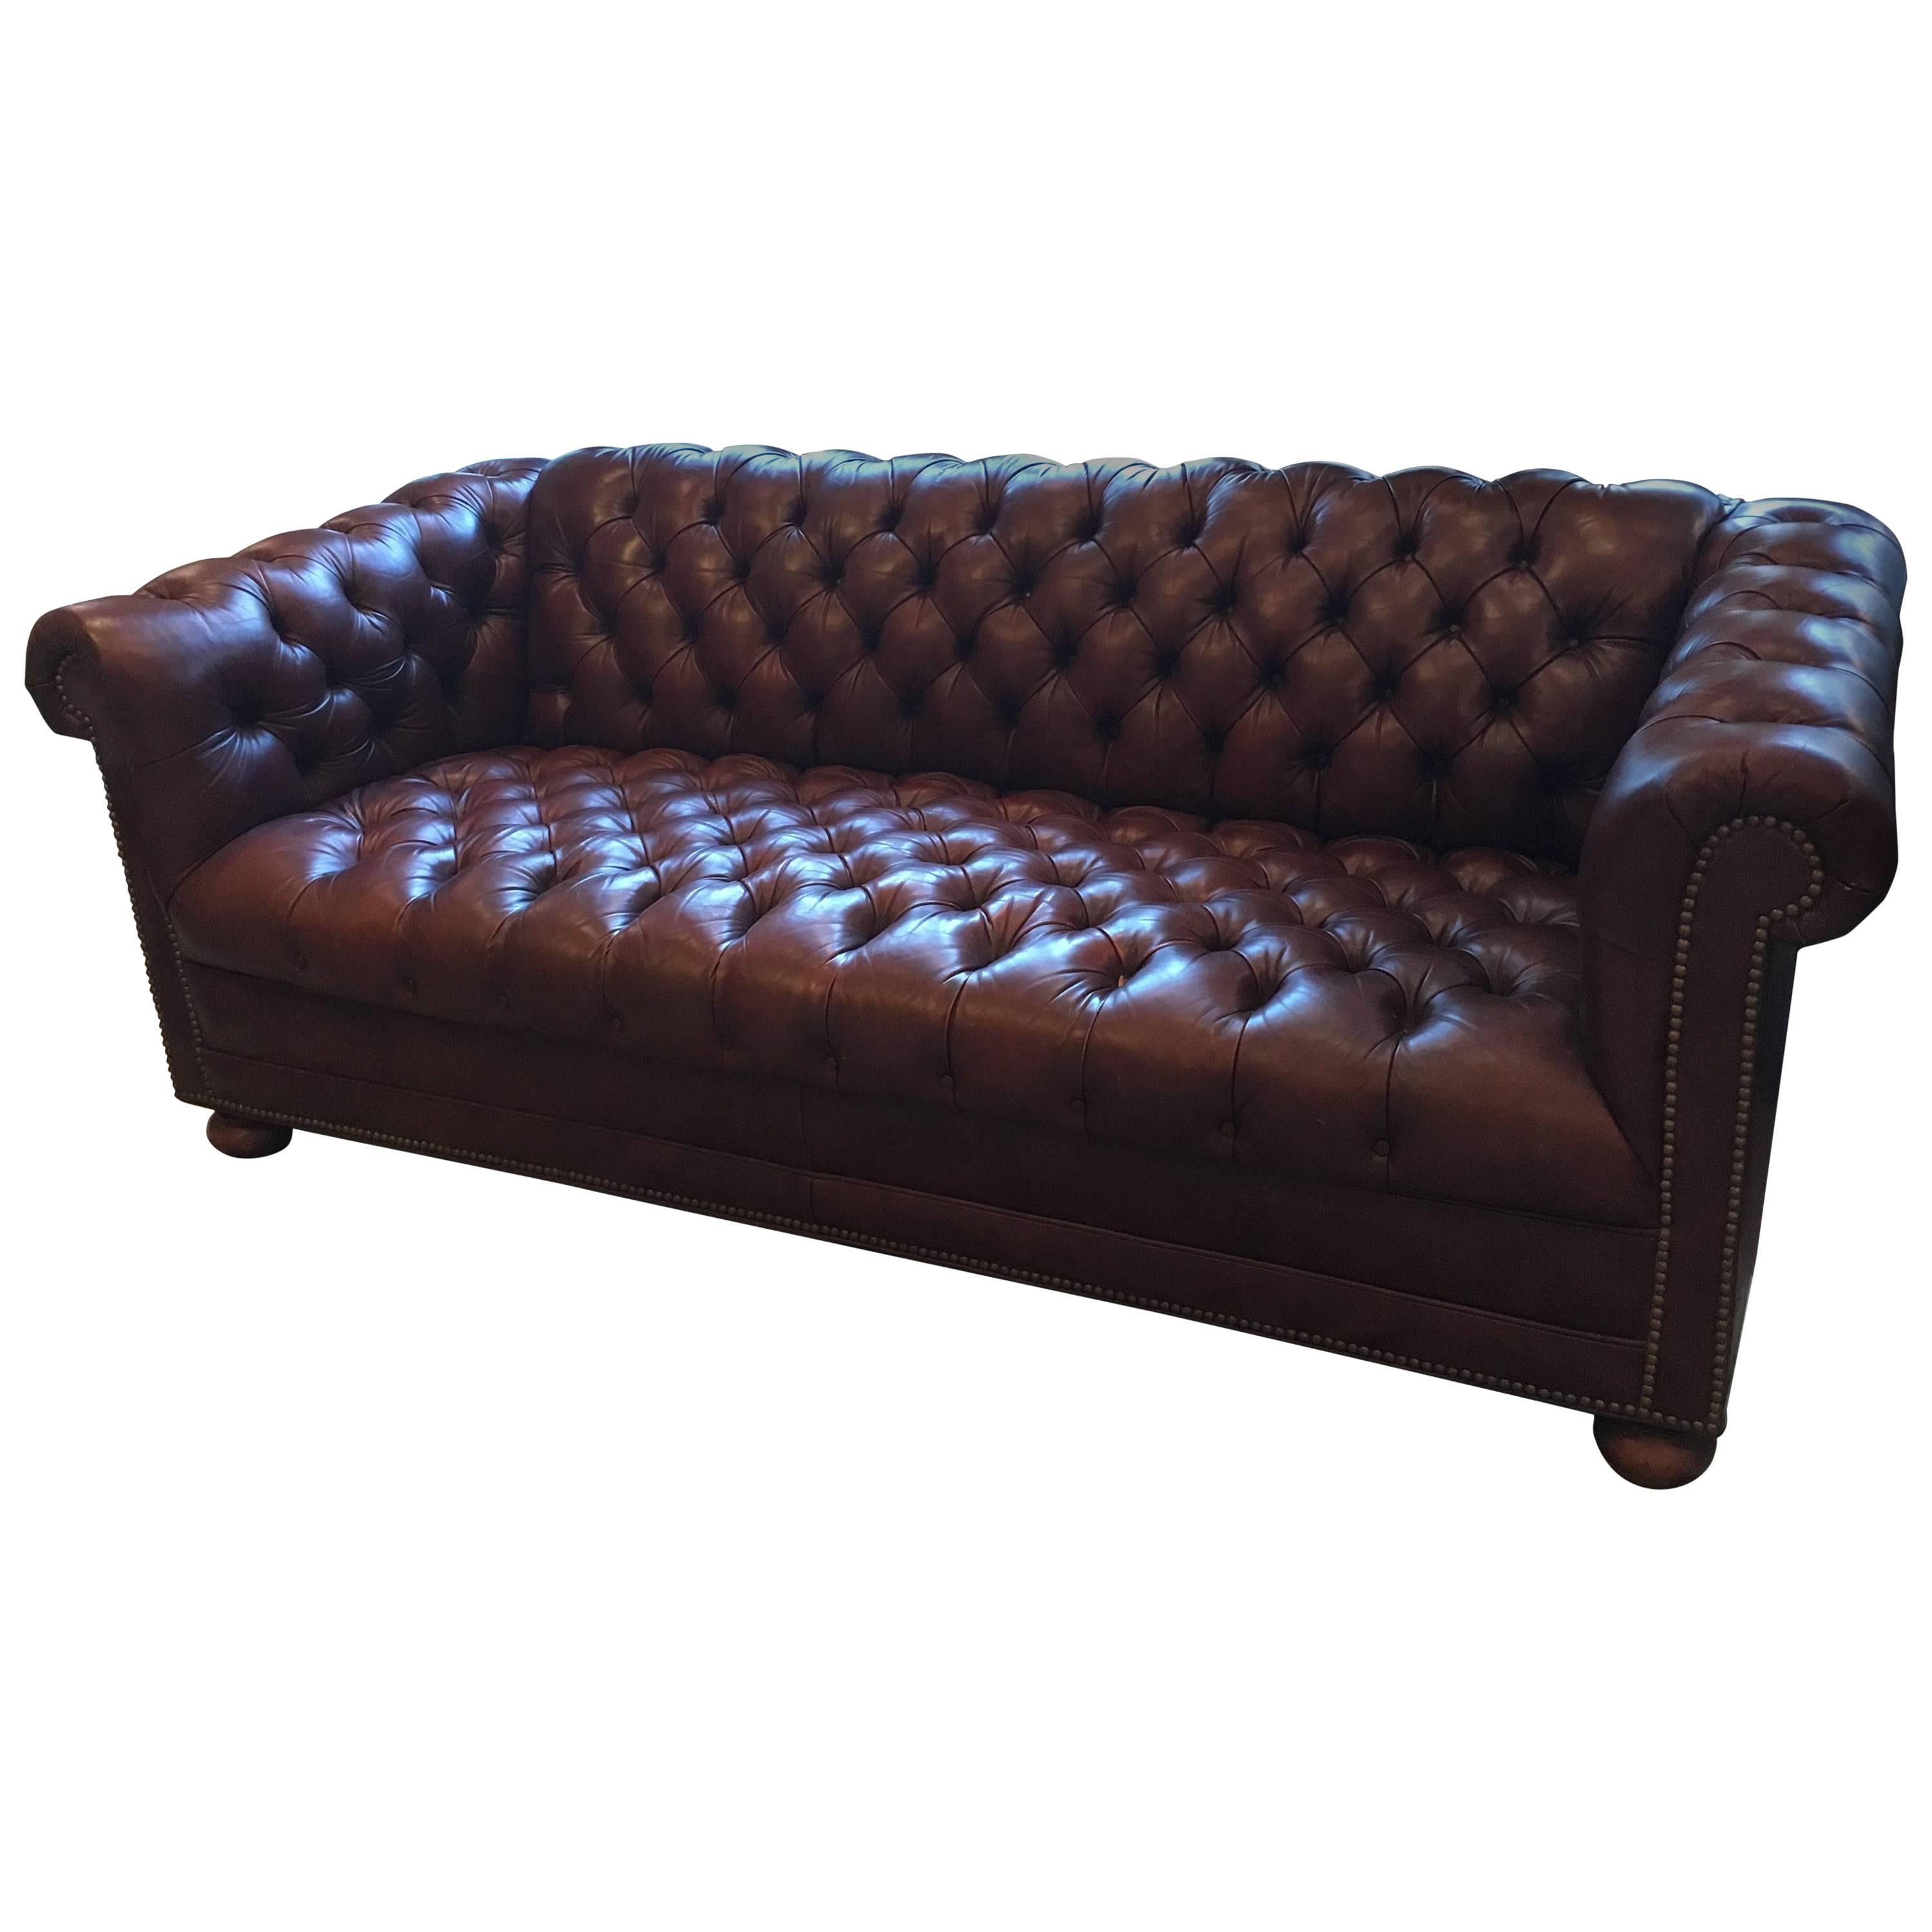 Libraryish Classic Warm Brown Leather Chesterfield Sofa